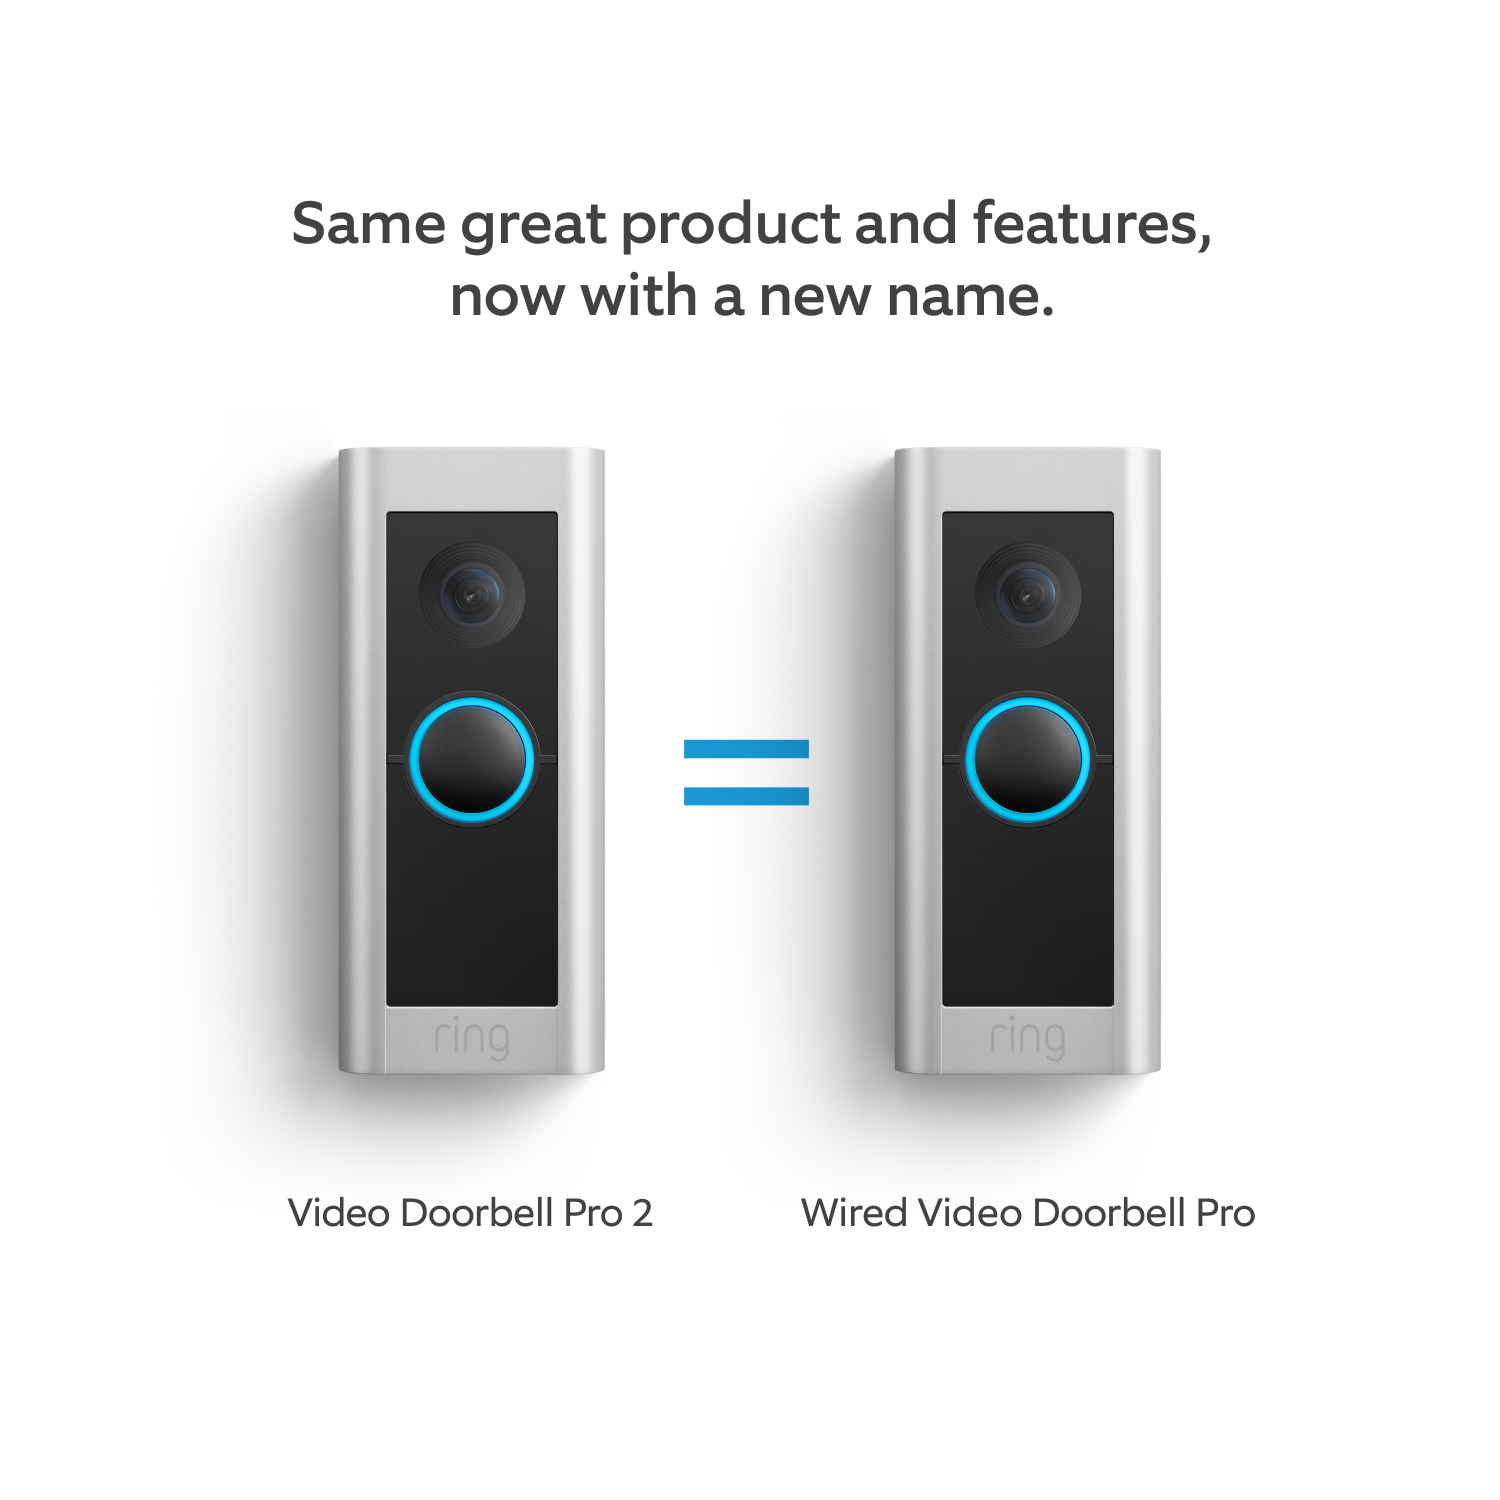 Wired Video Doorbell Pro Plug-in with Chime Pro (Formerly Video Doorbell Pro 2 with Plug-in Adapter + Chime Pro) - RVD Pro 2 = Wired Video Doorbell Pro - Lifestyle image